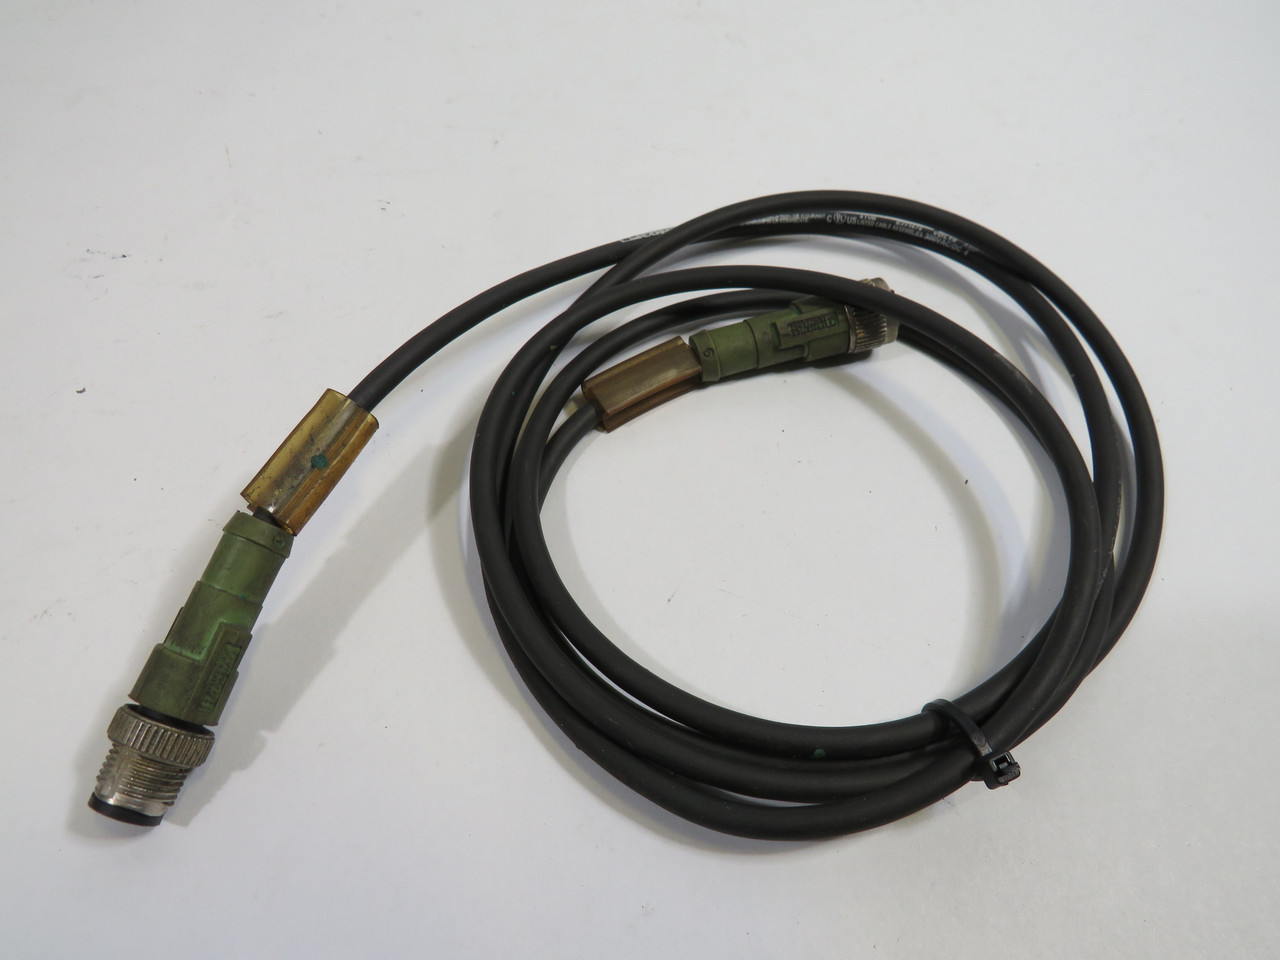 Phoenix Contact 1668373 Cable Assy 1.5m SAC-4P-M12MS/1.5-PUR/M12FS USED